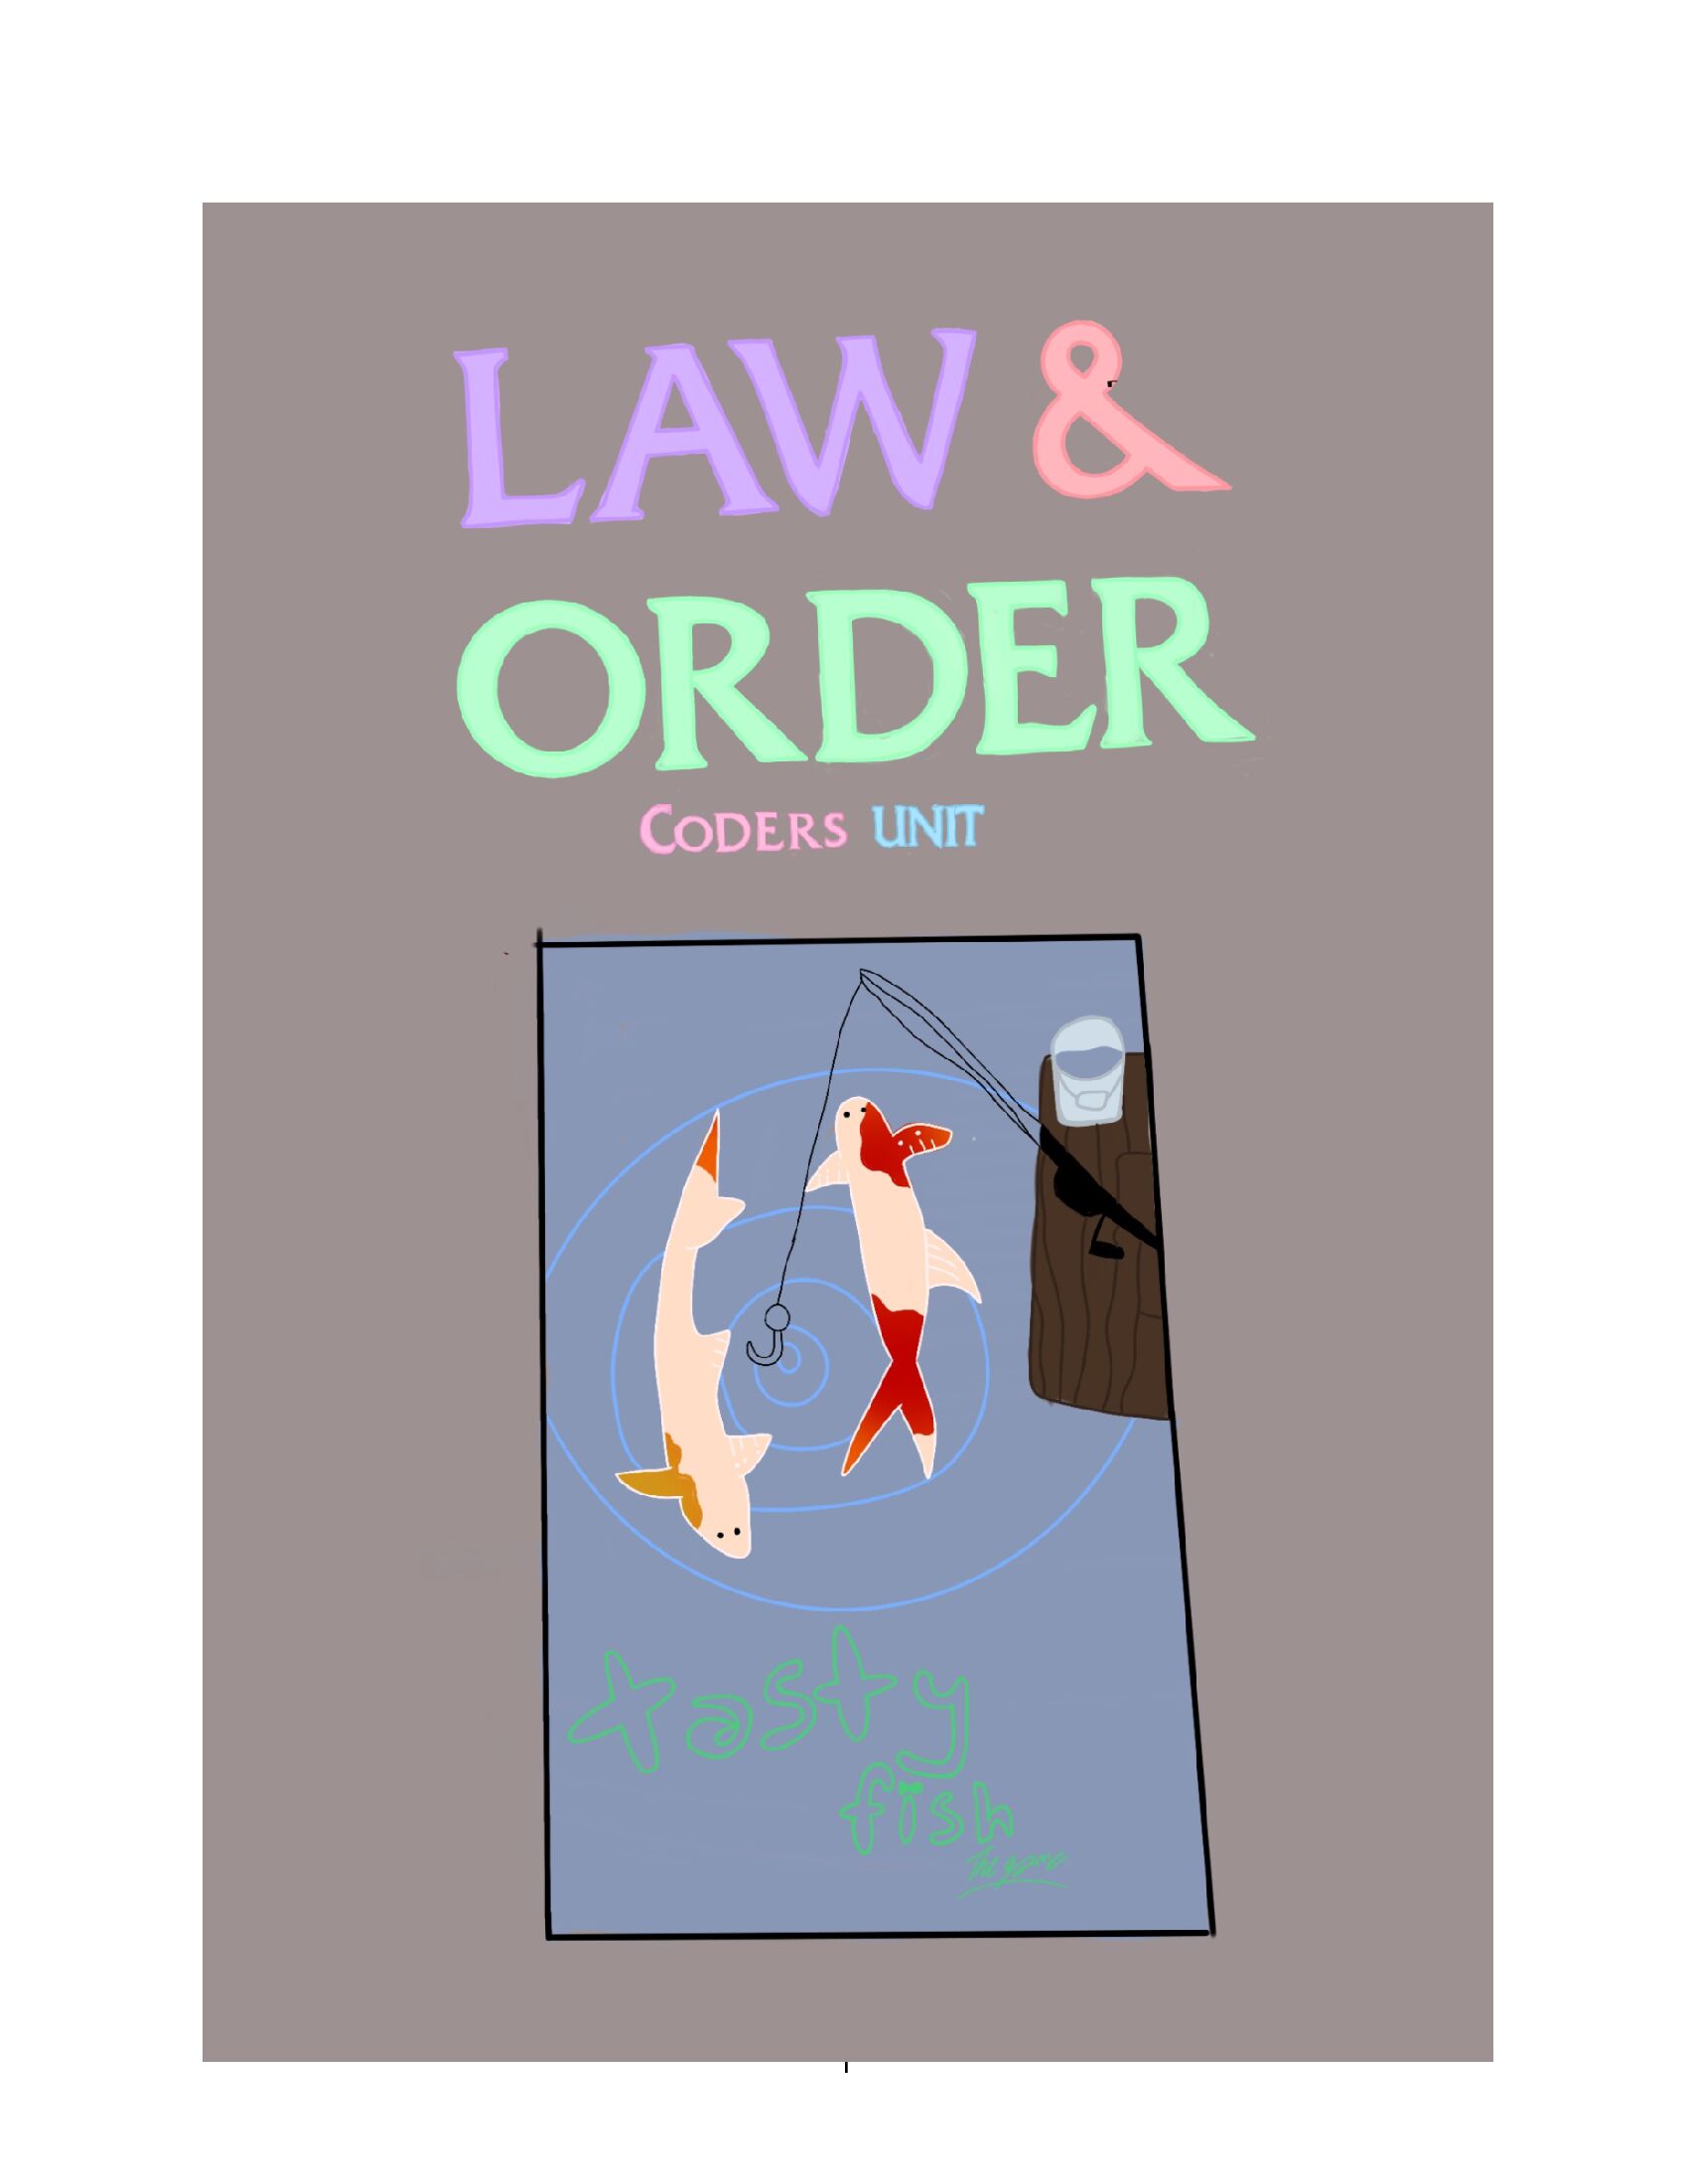 Law and Order Coder's Unit